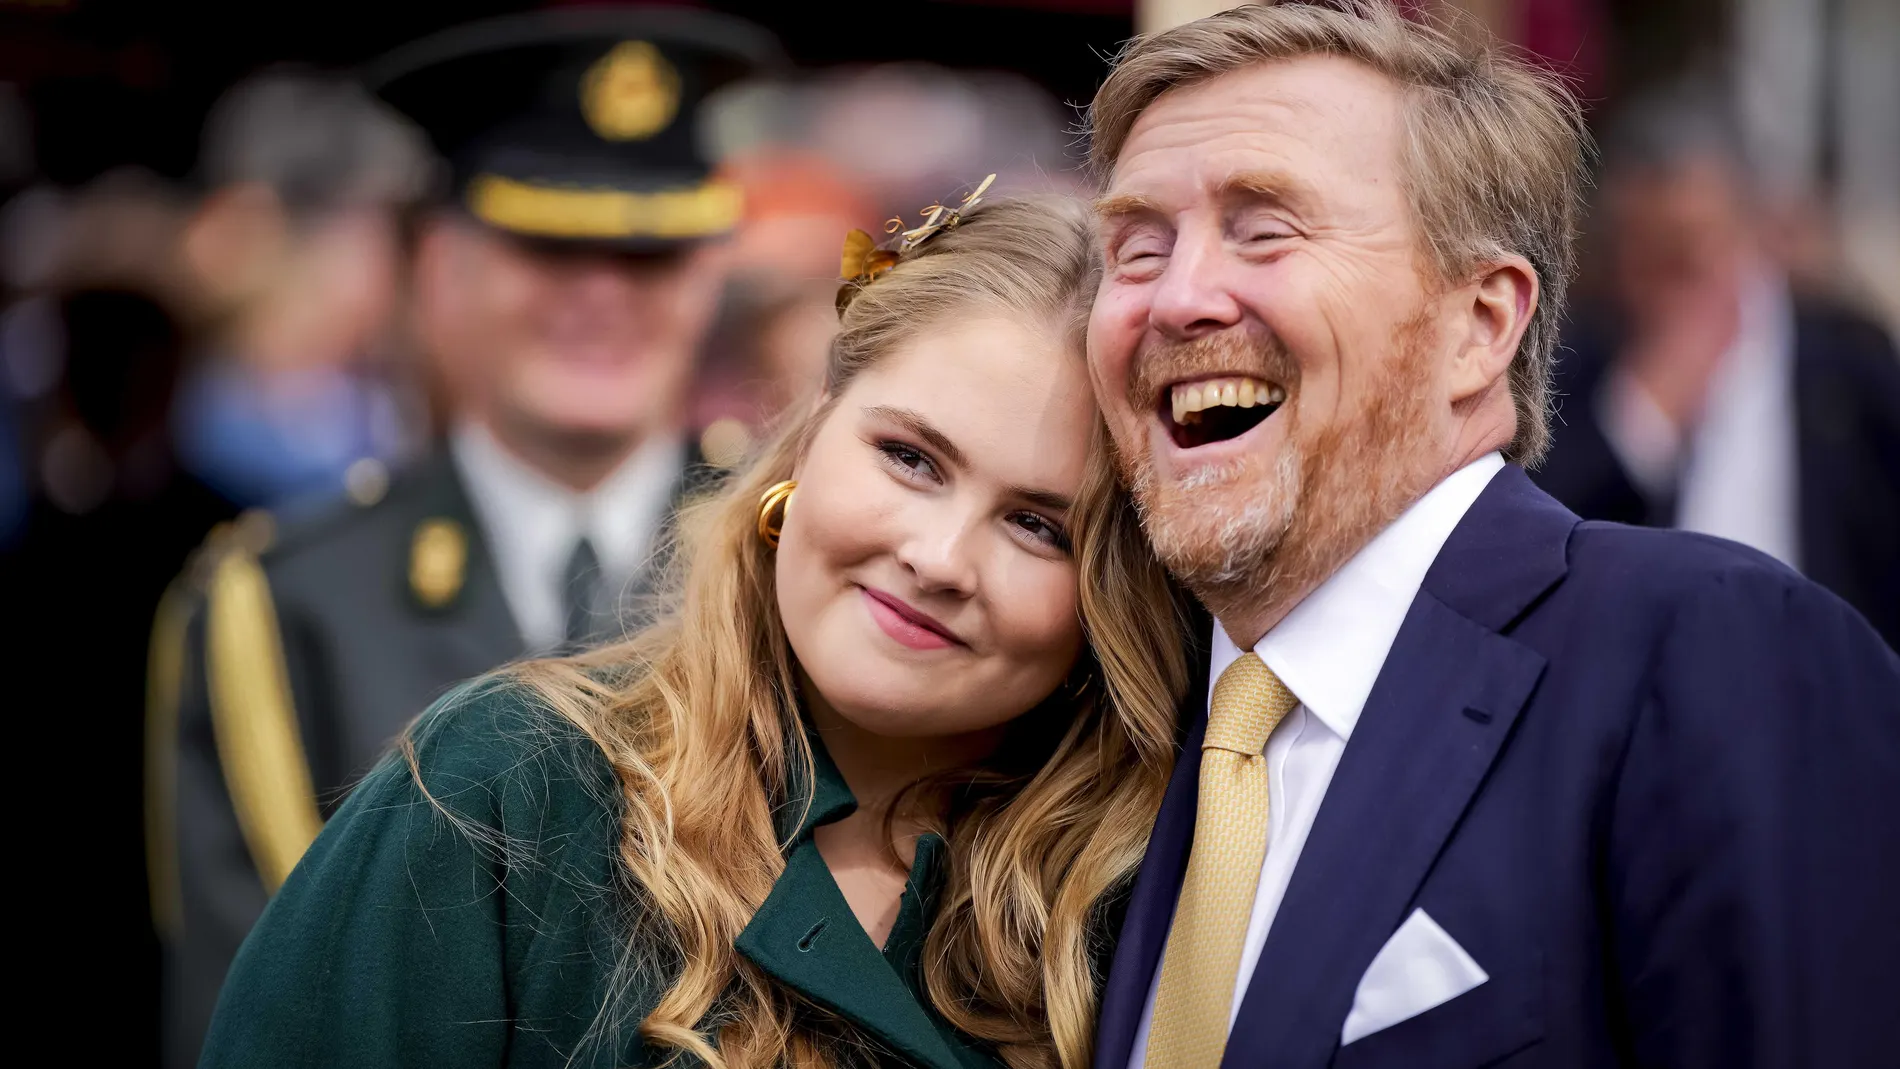 Emmen (Netherlands), 27/04/2024.- Princess Amalia and King Willem-Alexander of the Netherlands laugh during the King's Day in Emmen, the Netherlands, 27 April 2024. The royal family and members of the royal family walk on a route through the city in the province of Drenthe, covering themes such as culture, innovation and sport. King's day celebrates the 57th birthday of King Willem-Alexander. (Países Bajos; Holanda) EFE/EPA/Freek van den Bergh 